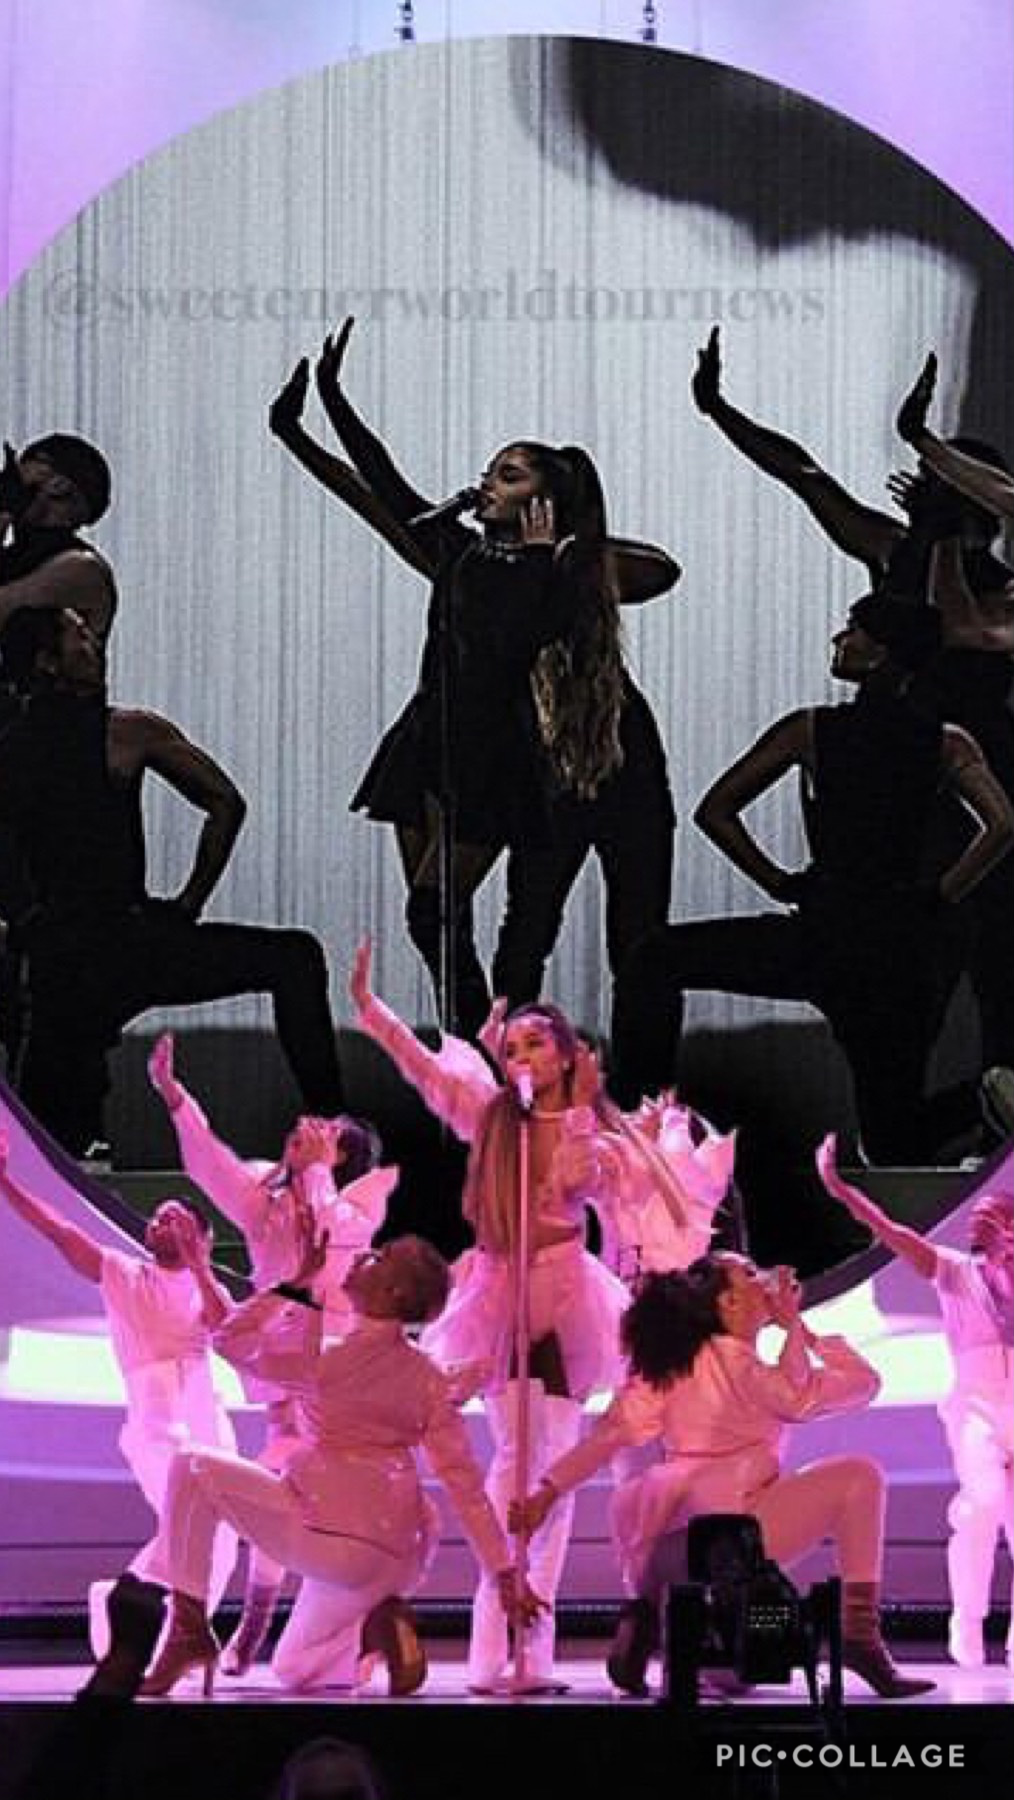 when are you seeing Ariana on tour? 💓👇🏼